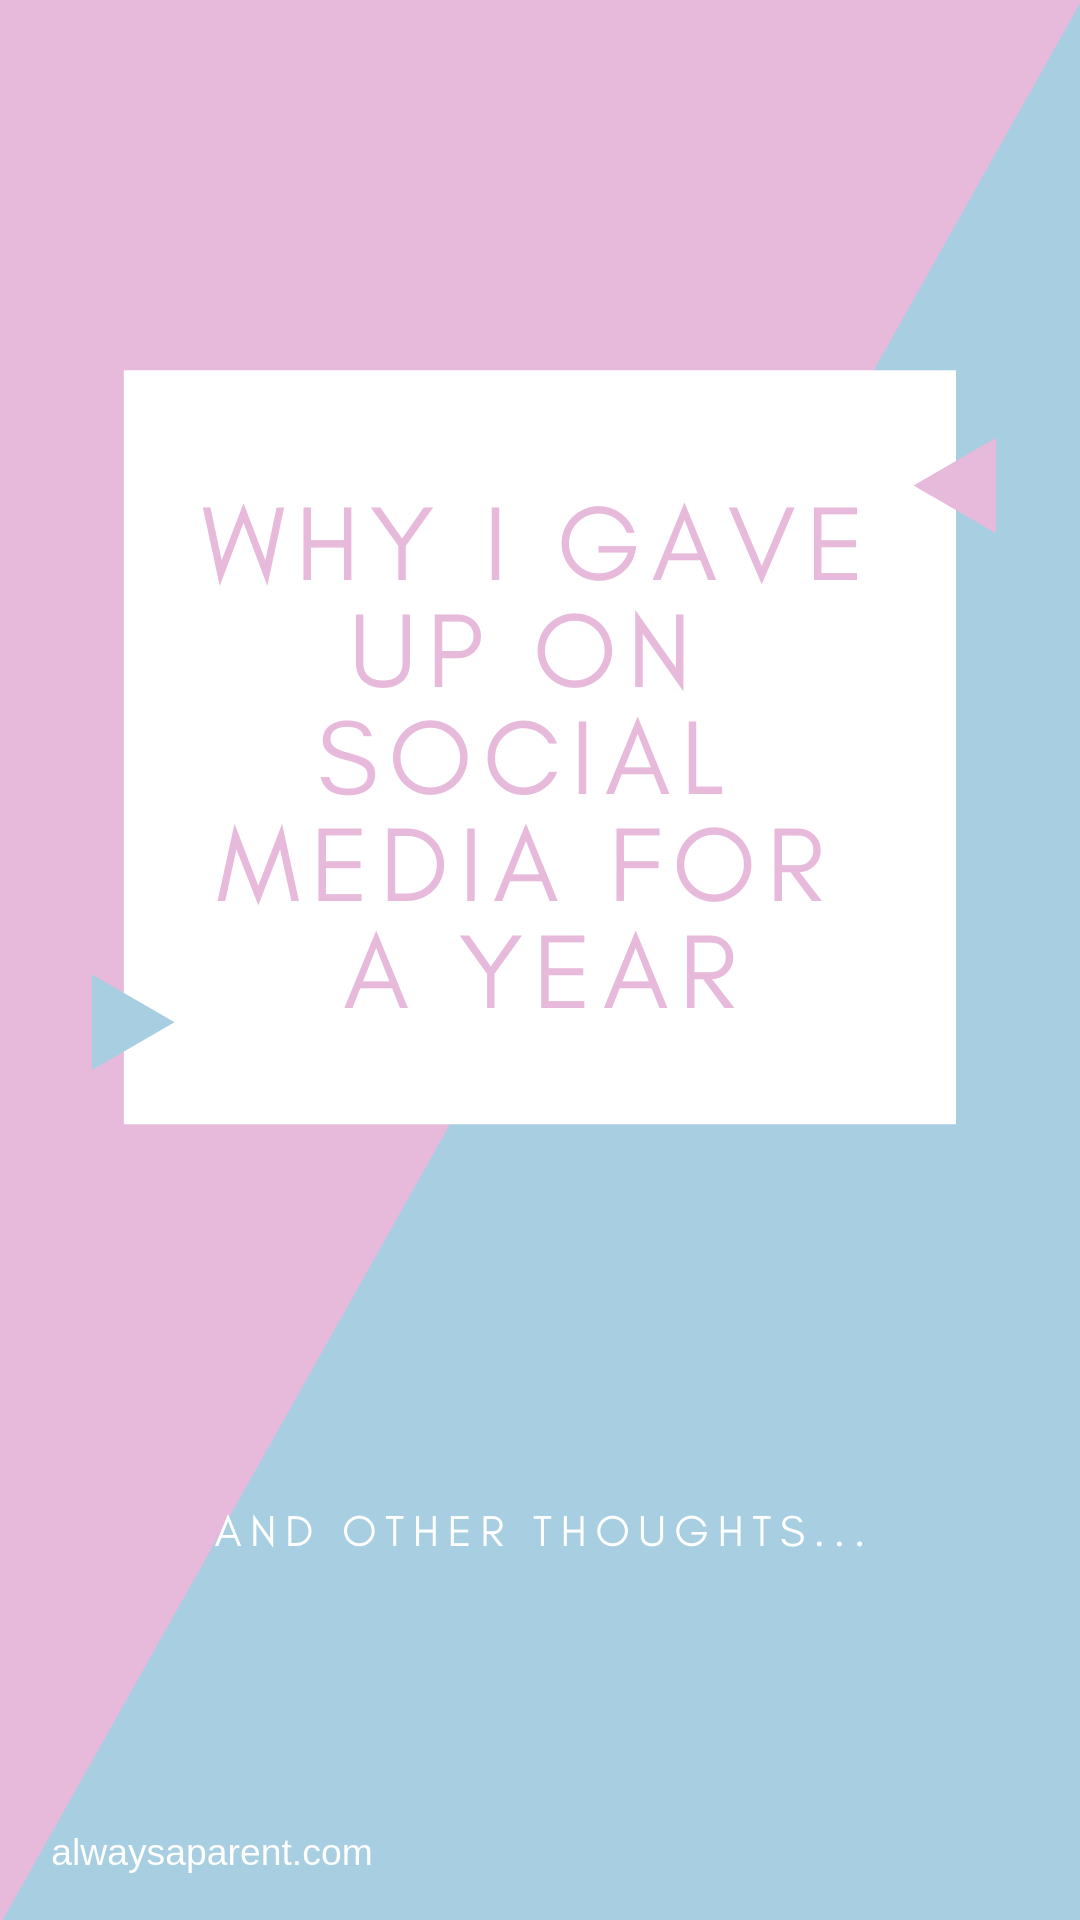 Why I gave up on social media for a year...and other thoughts